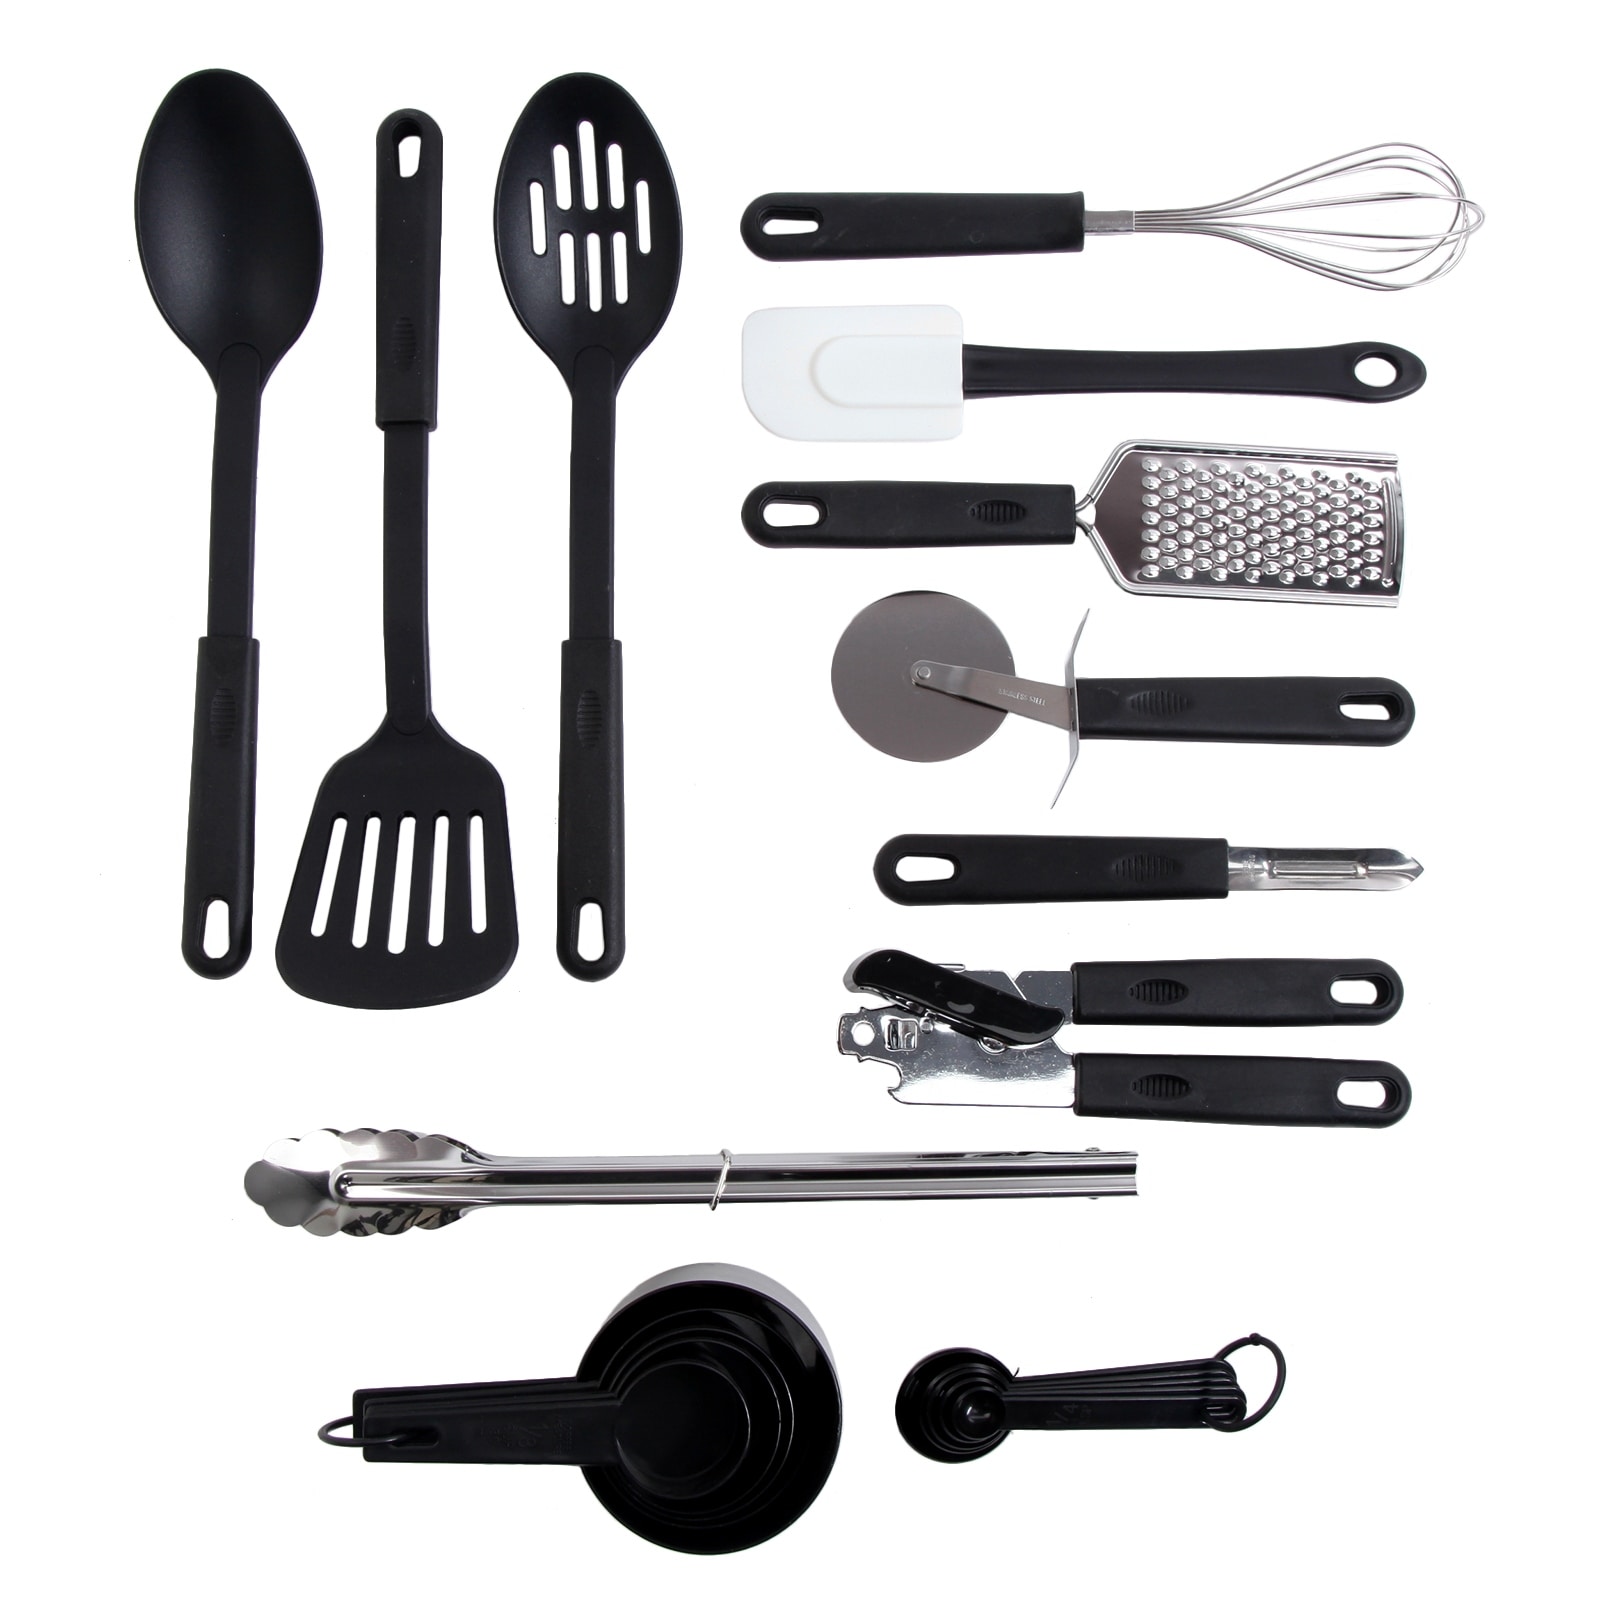 https://ak1.ostkcdn.com/images/products/is/images/direct/b0461d889eeb07798dfb23dbf2d5a0d37dfa222d/Gibson-Total-Kitchen-20-Piece-Tool-Gadget-Prepare-and-Serve-Combo-Set.jpg